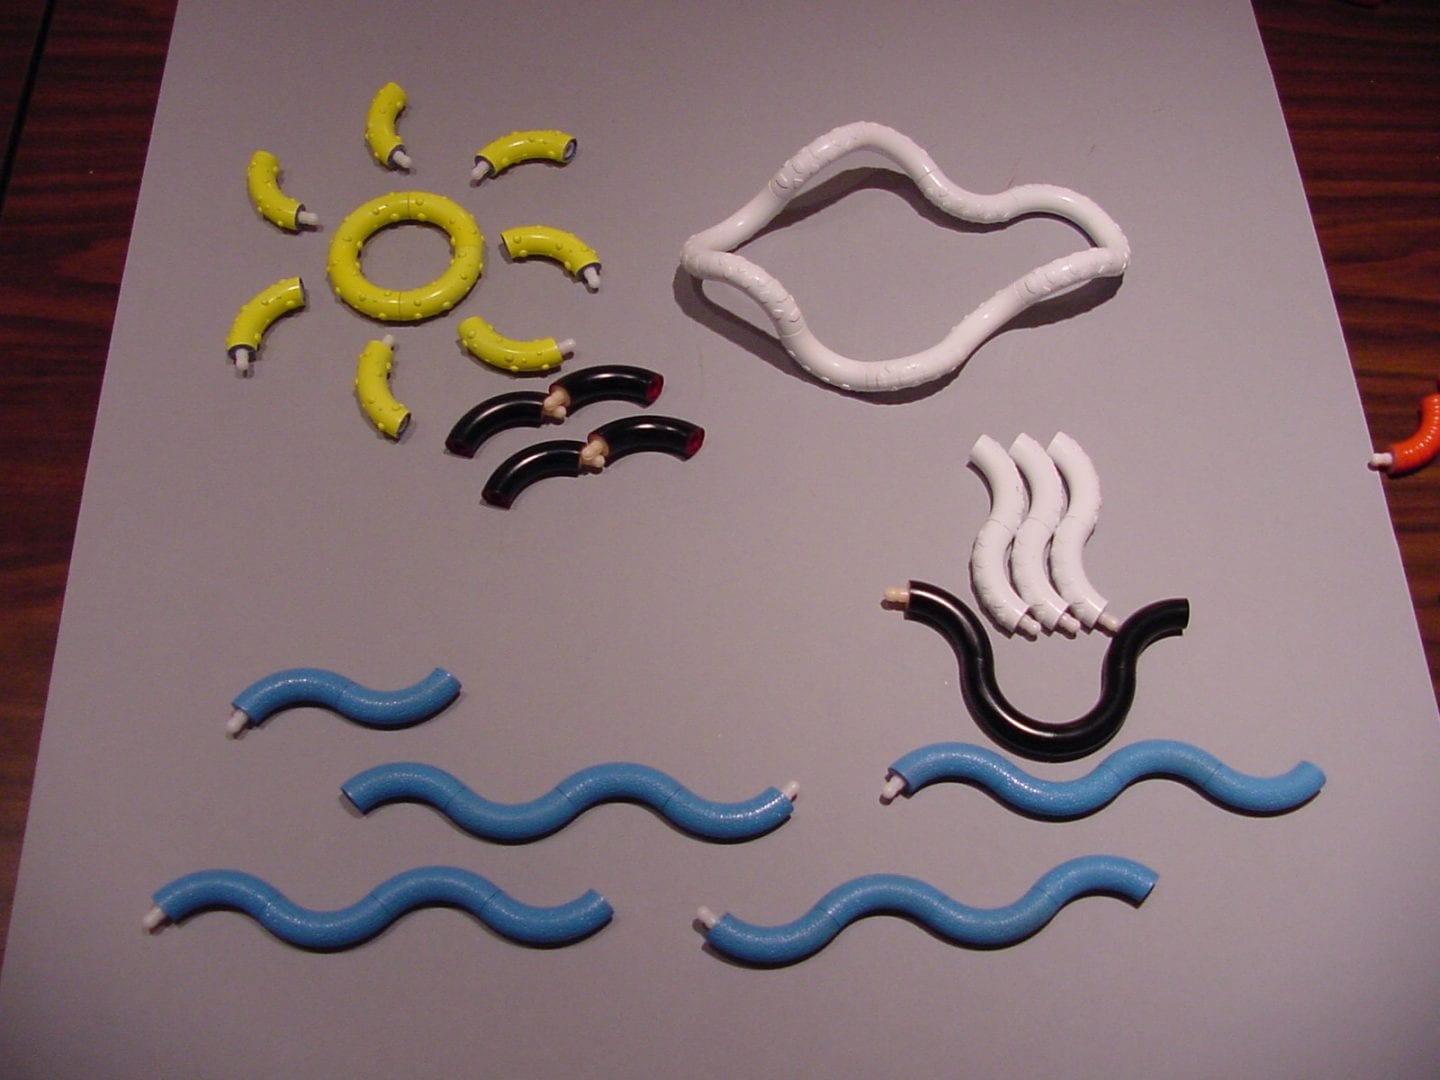 image of tangle toys arranged into an ocean scene on a table top